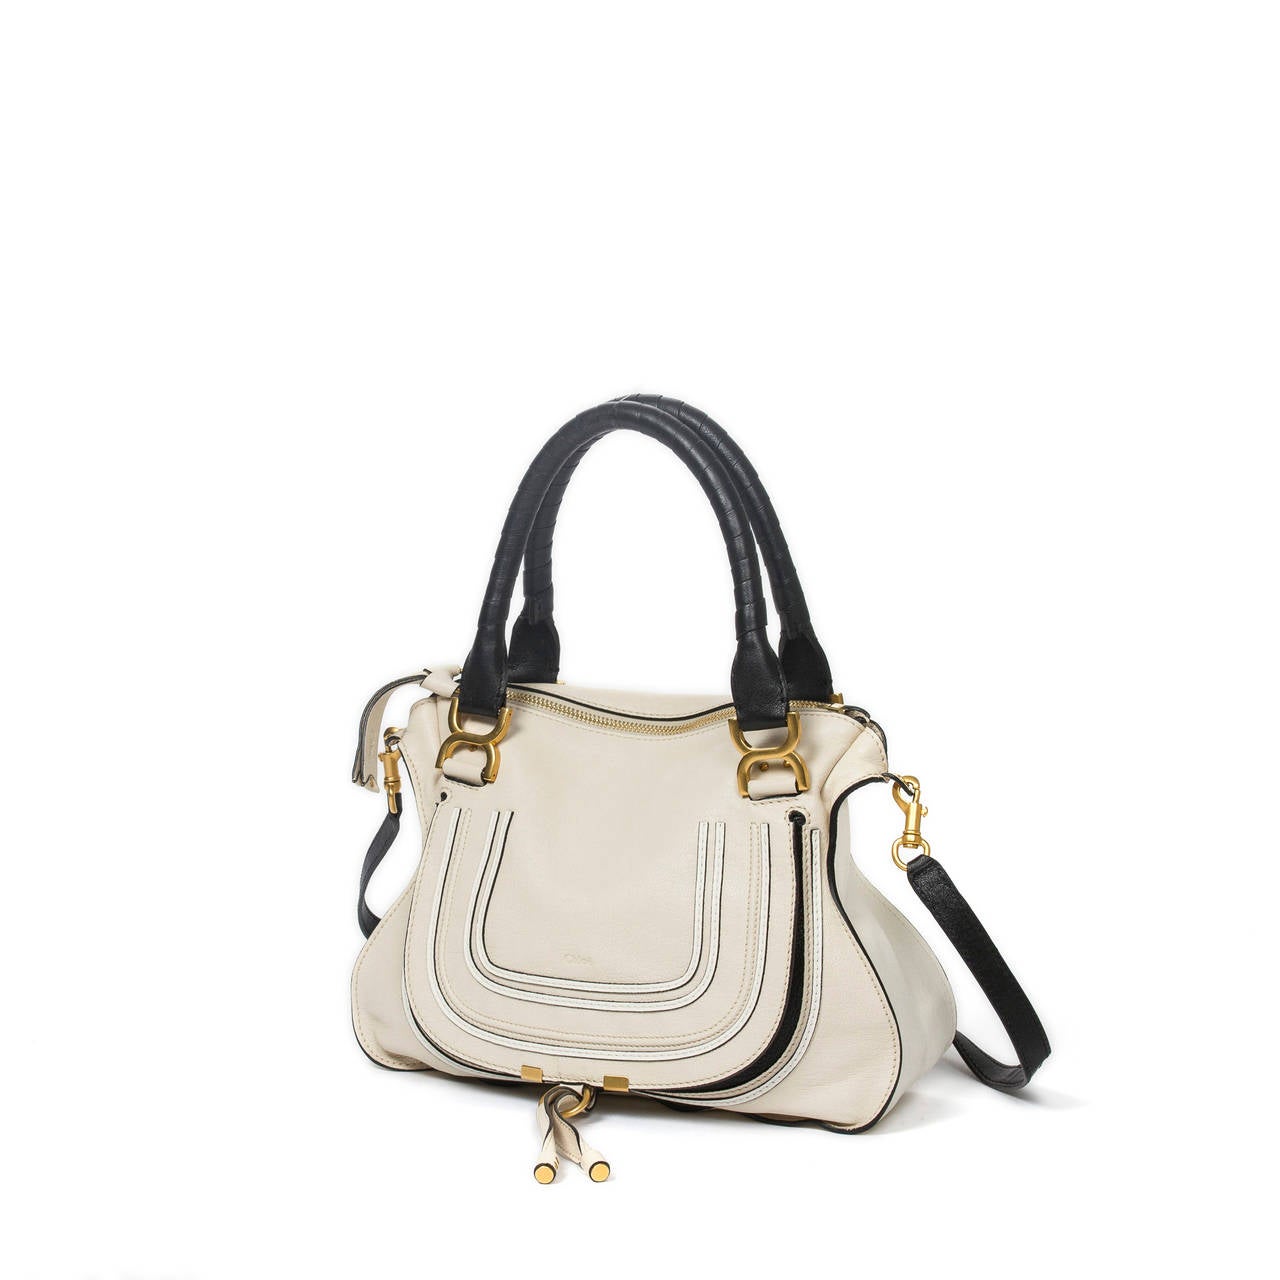 Chloé Marcie GM in cream grained leather with back slip pocket and black leather handles (15cm). Black interior with pocket. Brushed gold tone hardware. Dustbag and strap (46cm) included. Pristine (NEW) condition.